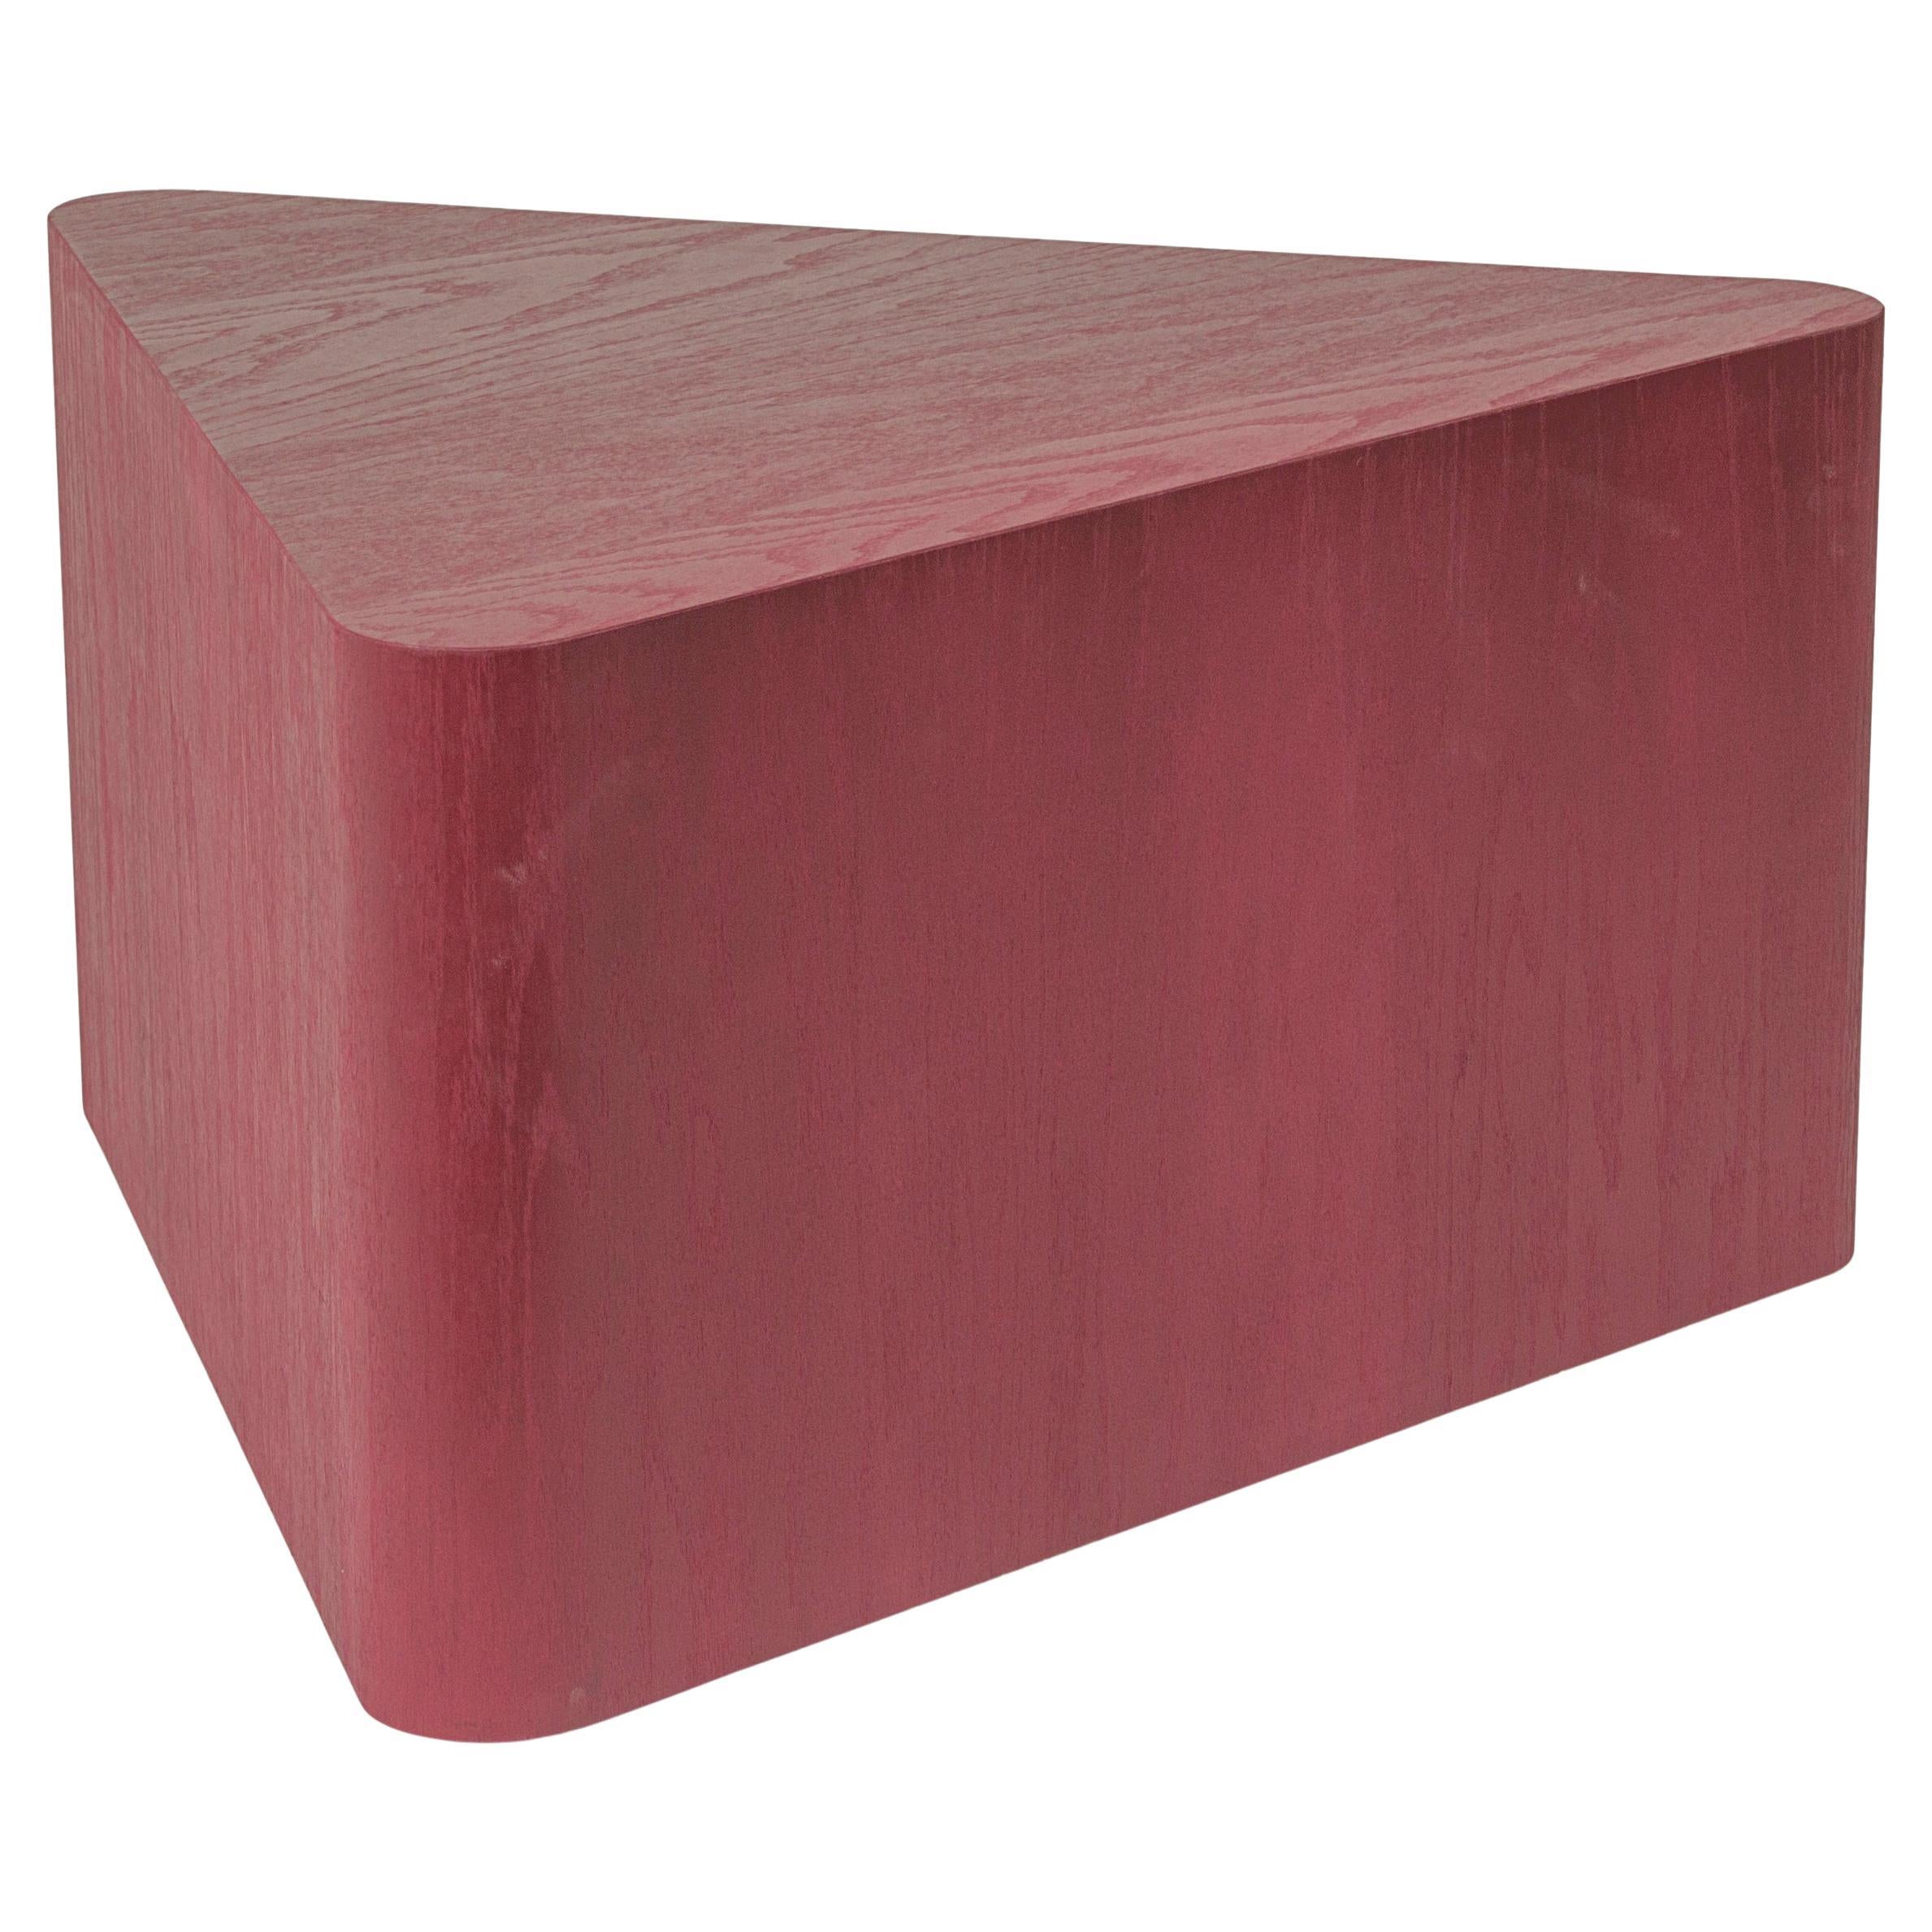 Moose Coffee Table Burgundy For Sale